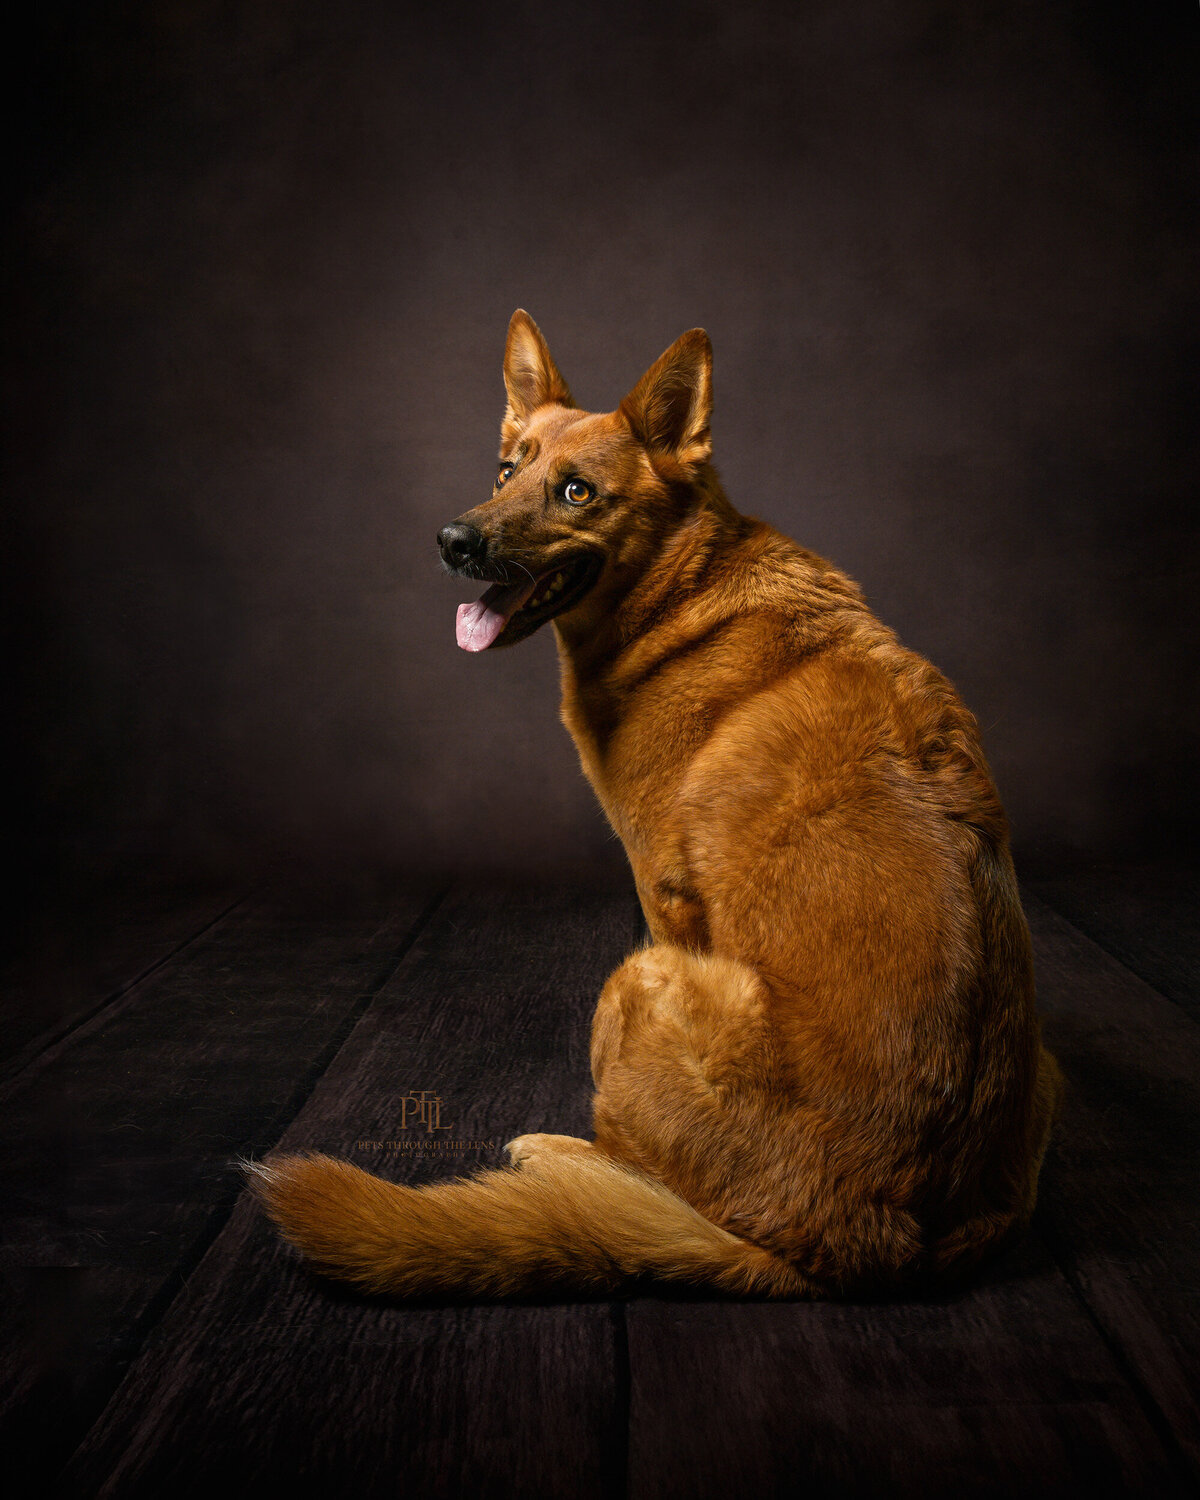 Discover the beauty of fine art dog portrait photography in Vancouver with Pets through the Lens Photography. This stunning image features a majestic dog sitting gracefully against a rich, dark backdrop, capturing its regal and serene demeanor. Our professional pet photography studio specializes in creating high-quality, artistic portraits that showcase the unique essence and personality of your pet. Choose Pets through the Lens Photography for an exquisite and timeless pet photography experience in Vancouver.